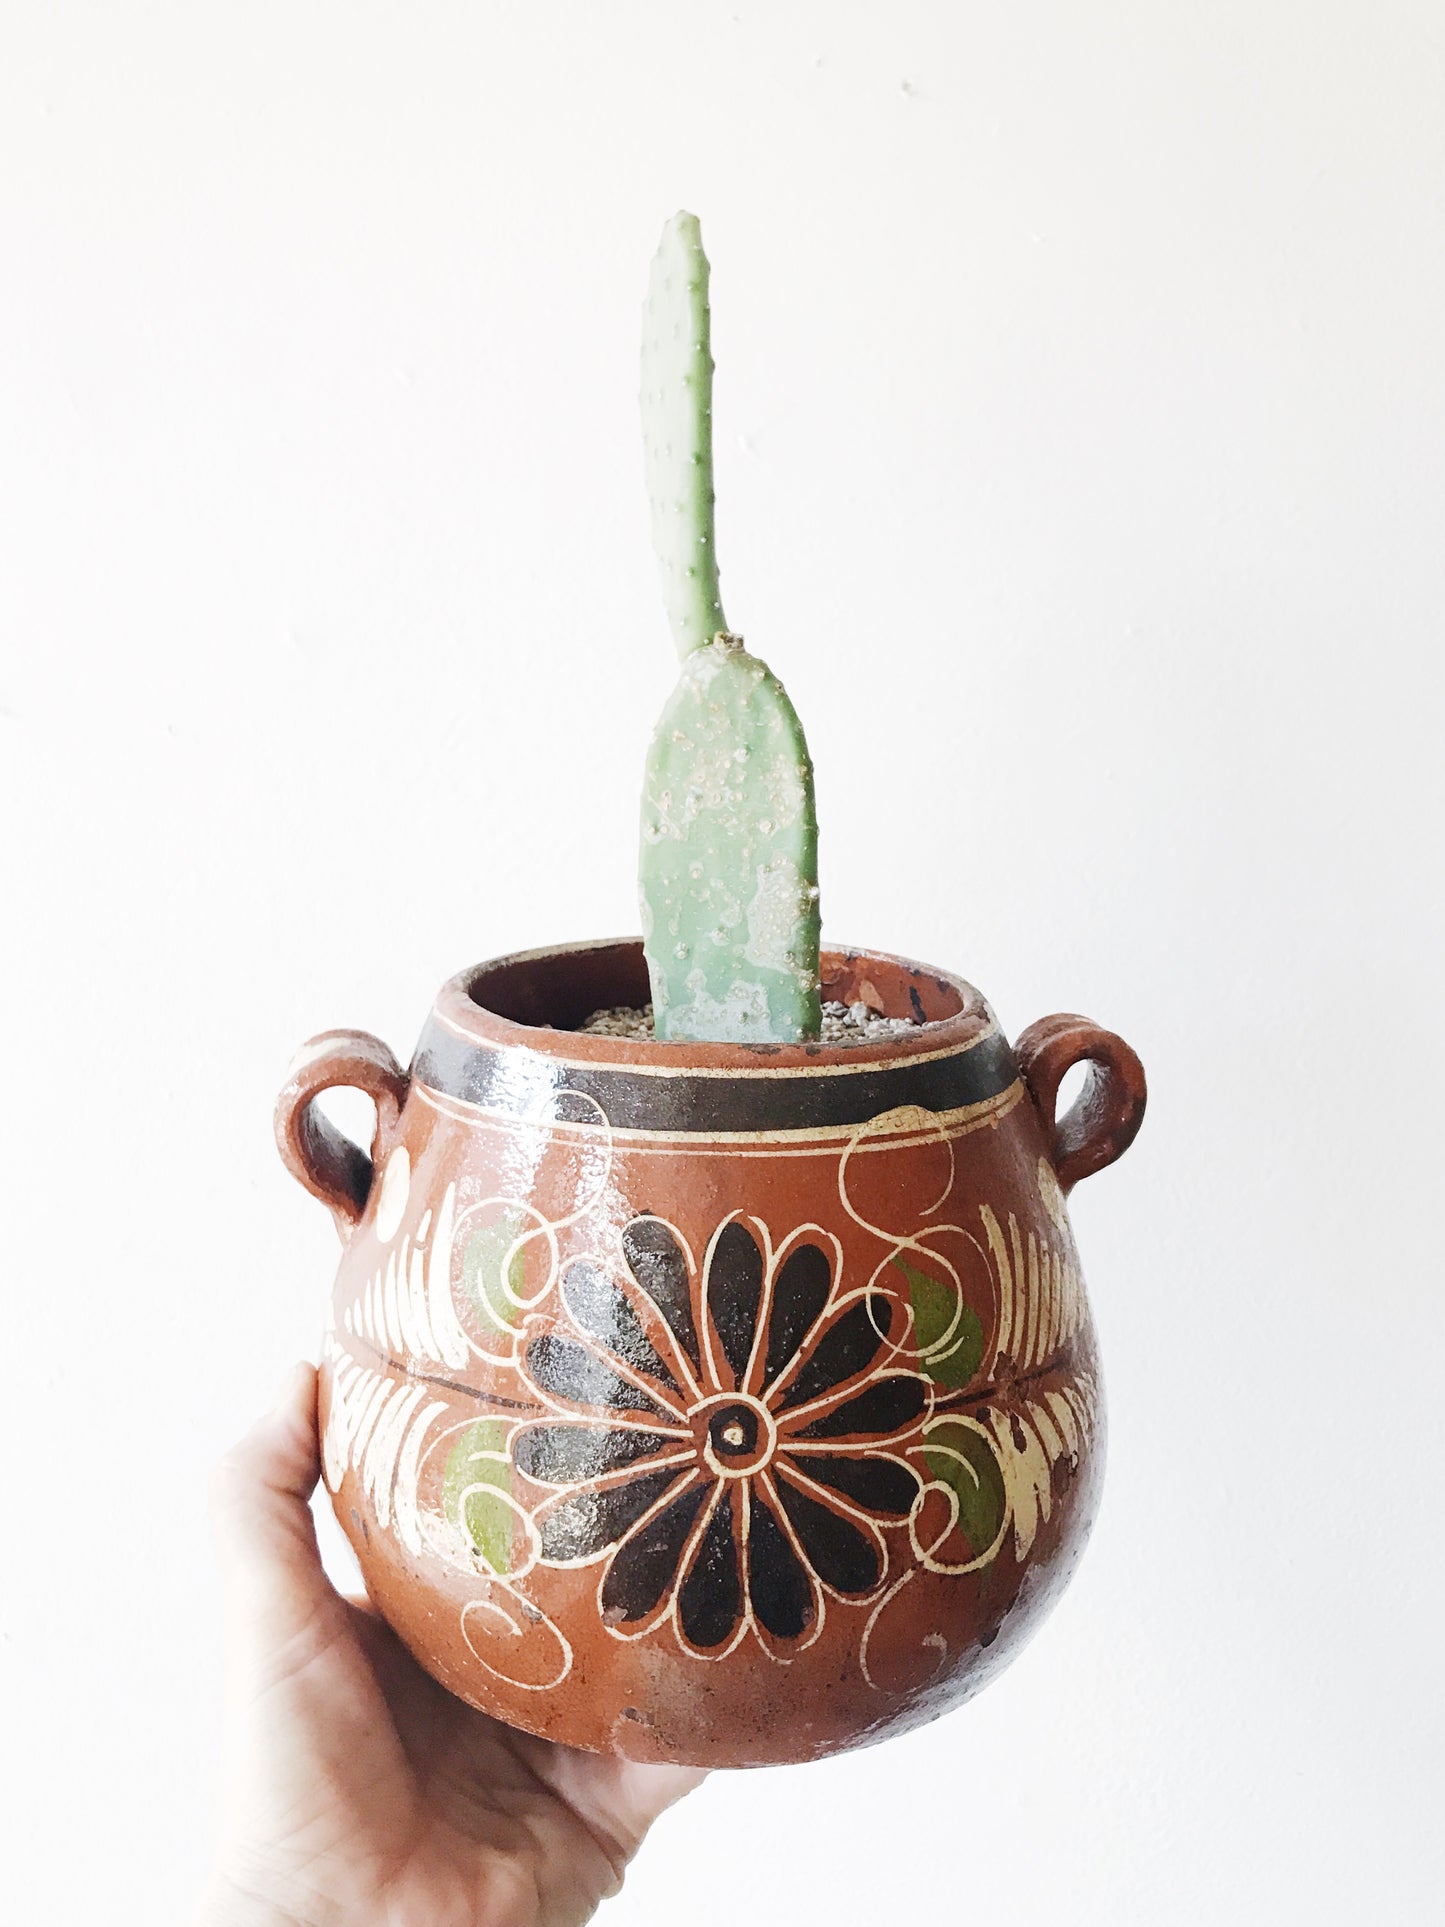 Paddle Cactus in Vintage Mexican Pot